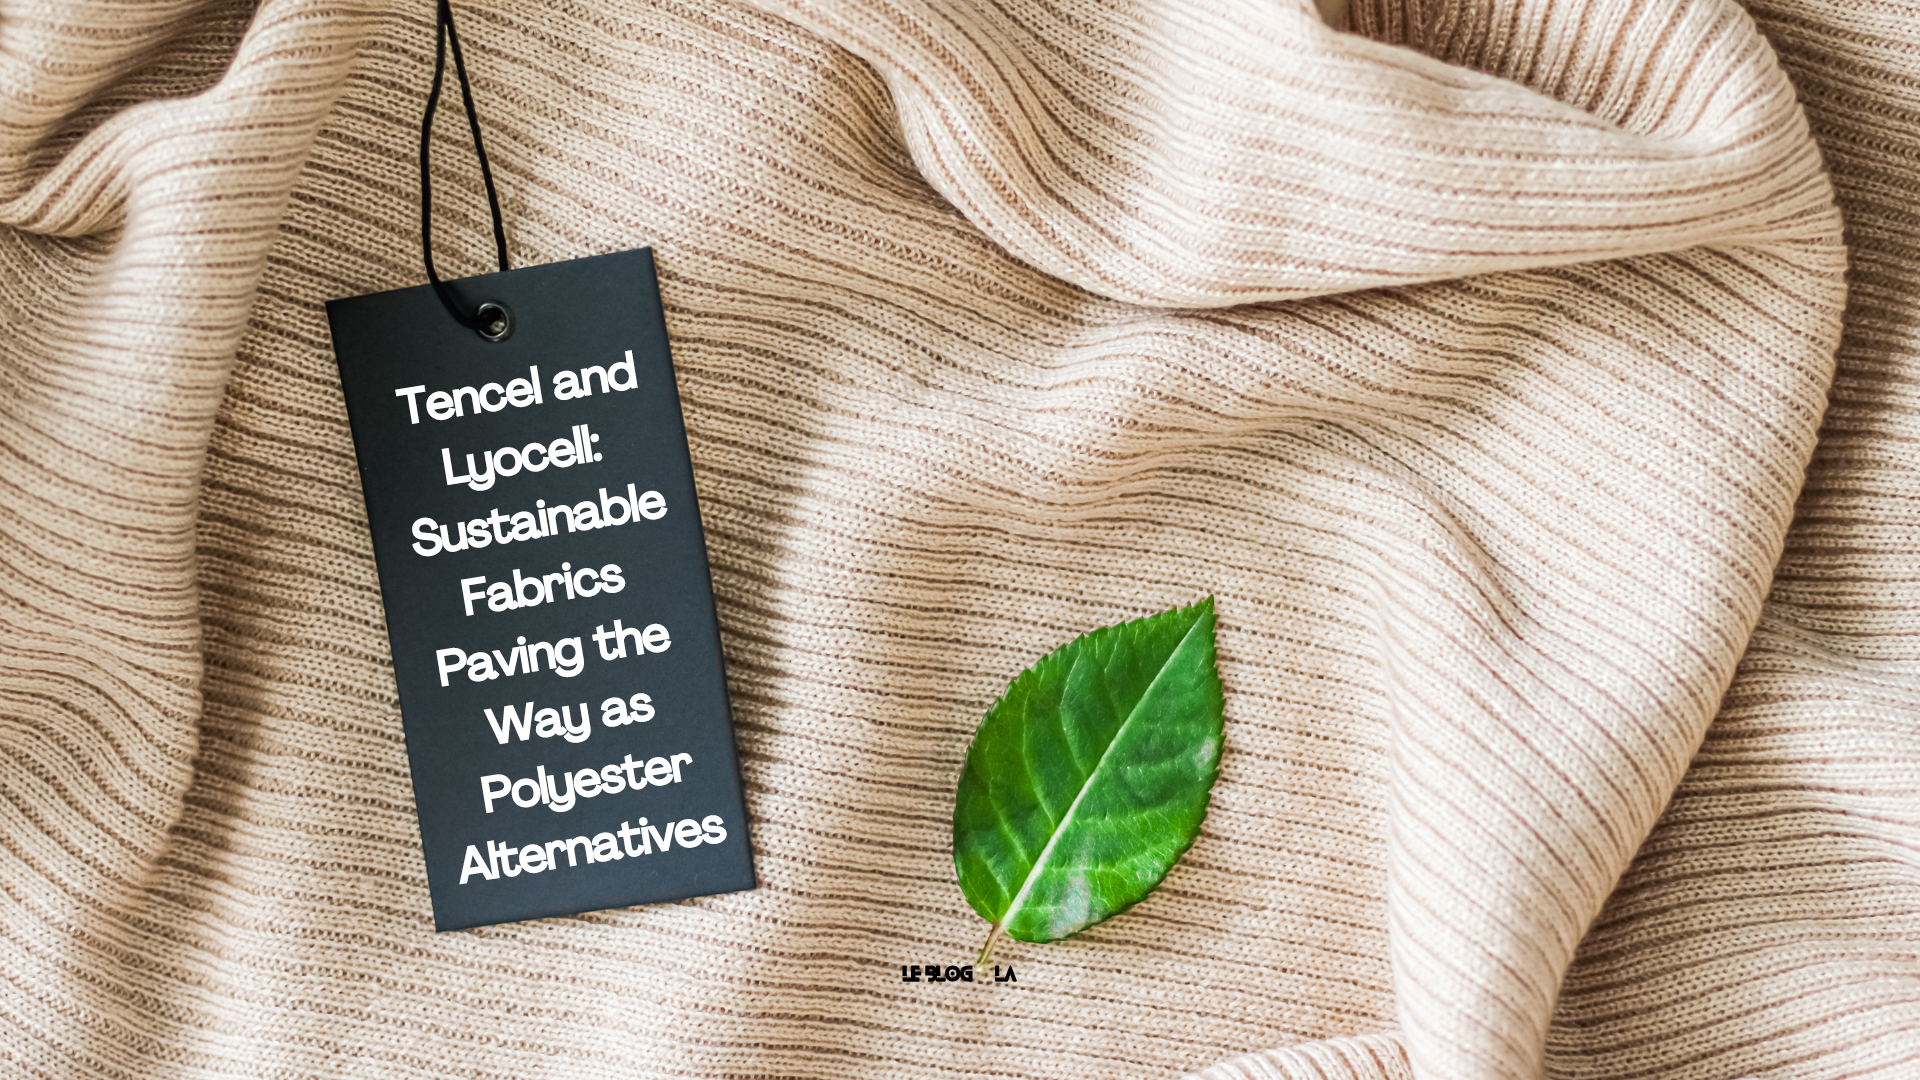 Tencel and Lyocell: Sustainable Fabrics Paving the Way as Polyester Alternatives